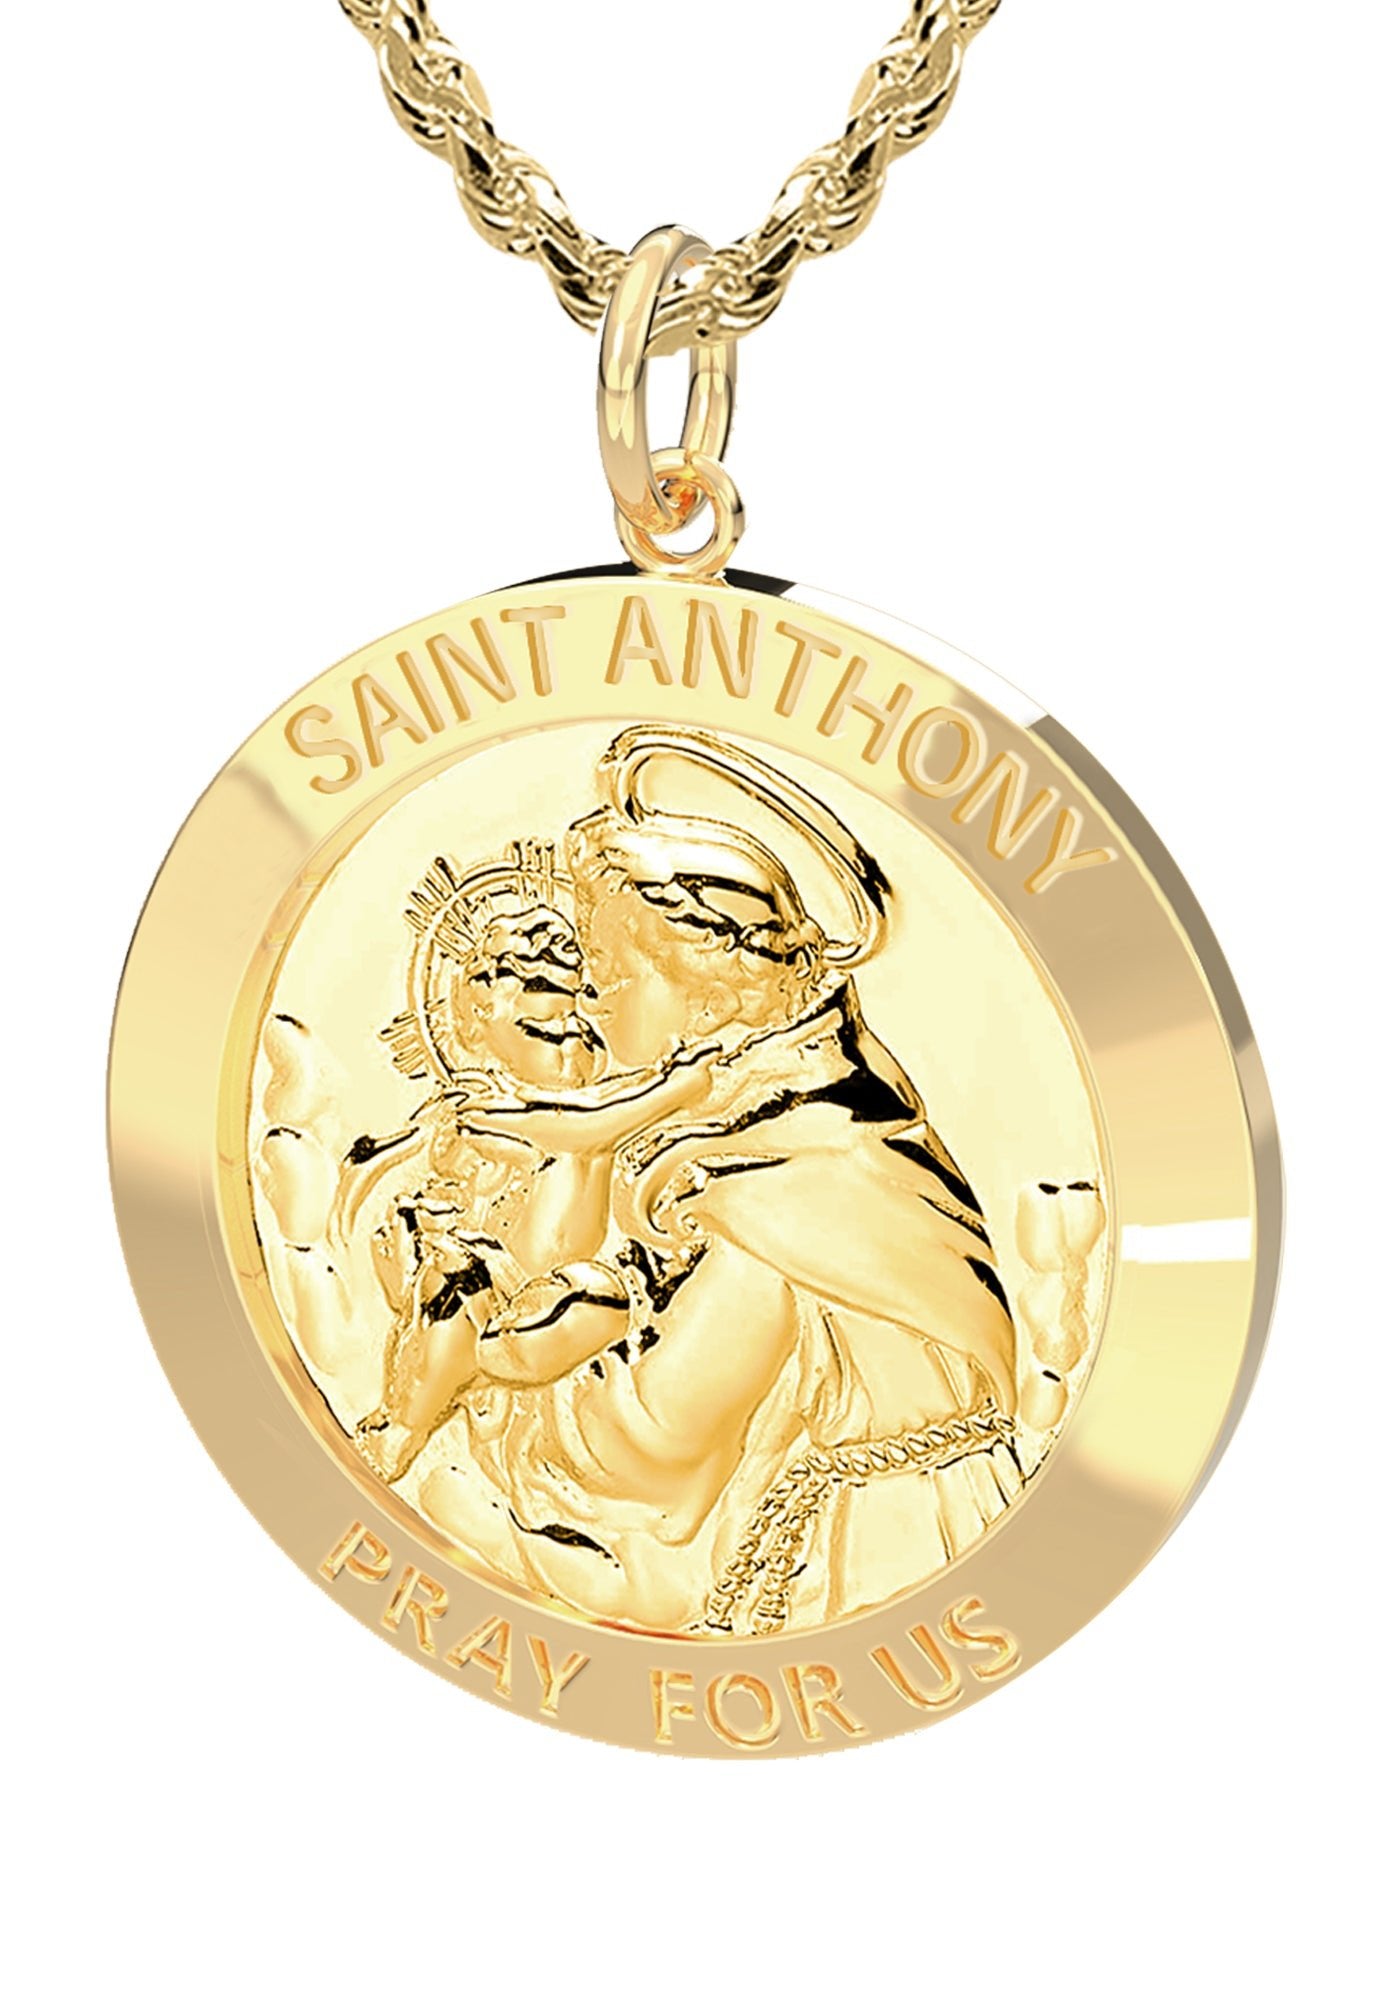 Ladies 14K Yellow Gold Solid Saint Anthony Medal Pendant Necklace, 22mm -  18in 2.0mm Rope Chain